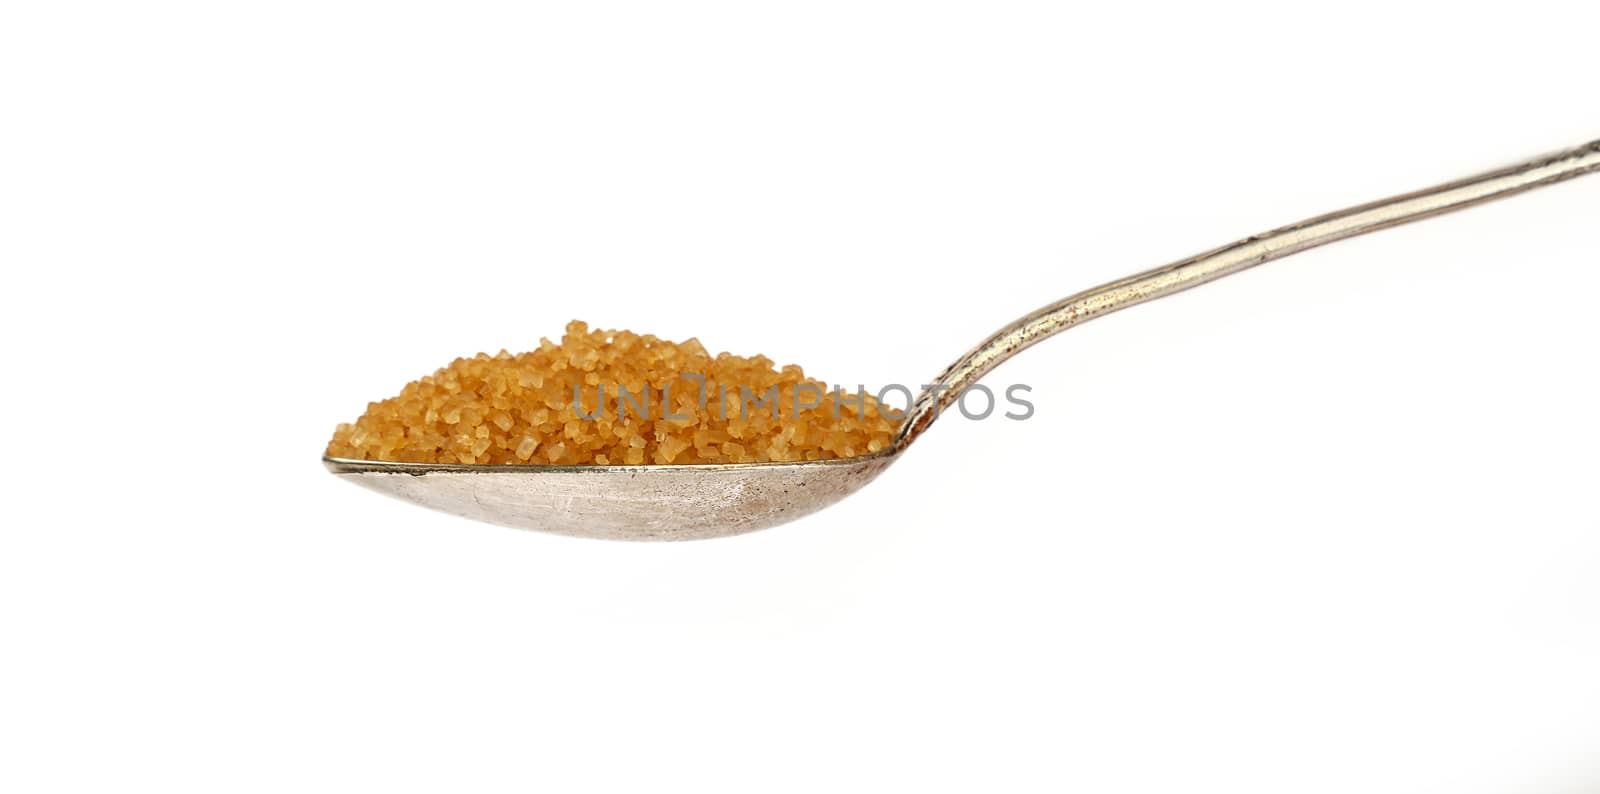 Close up one vintage silver metal spoon full of raw brown cane sugar isolated on white background, low angle side view